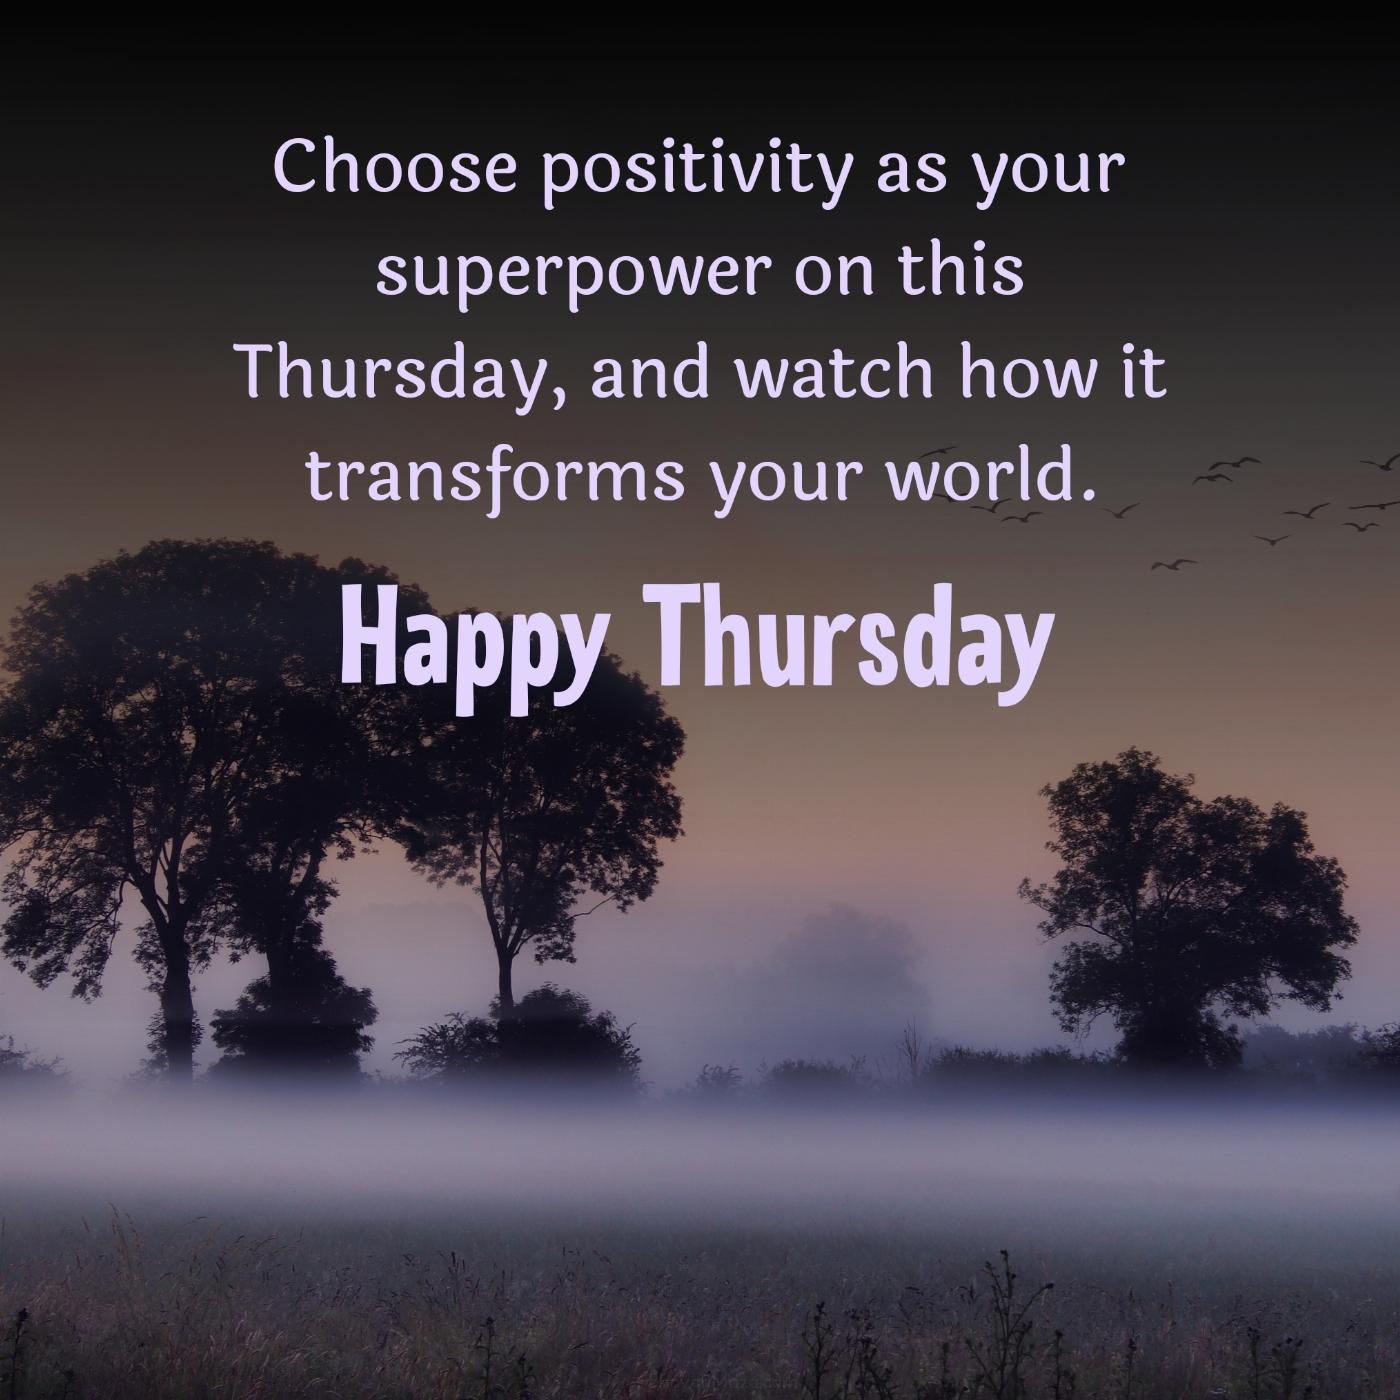 Choose positivity as your superpower on this Thursday